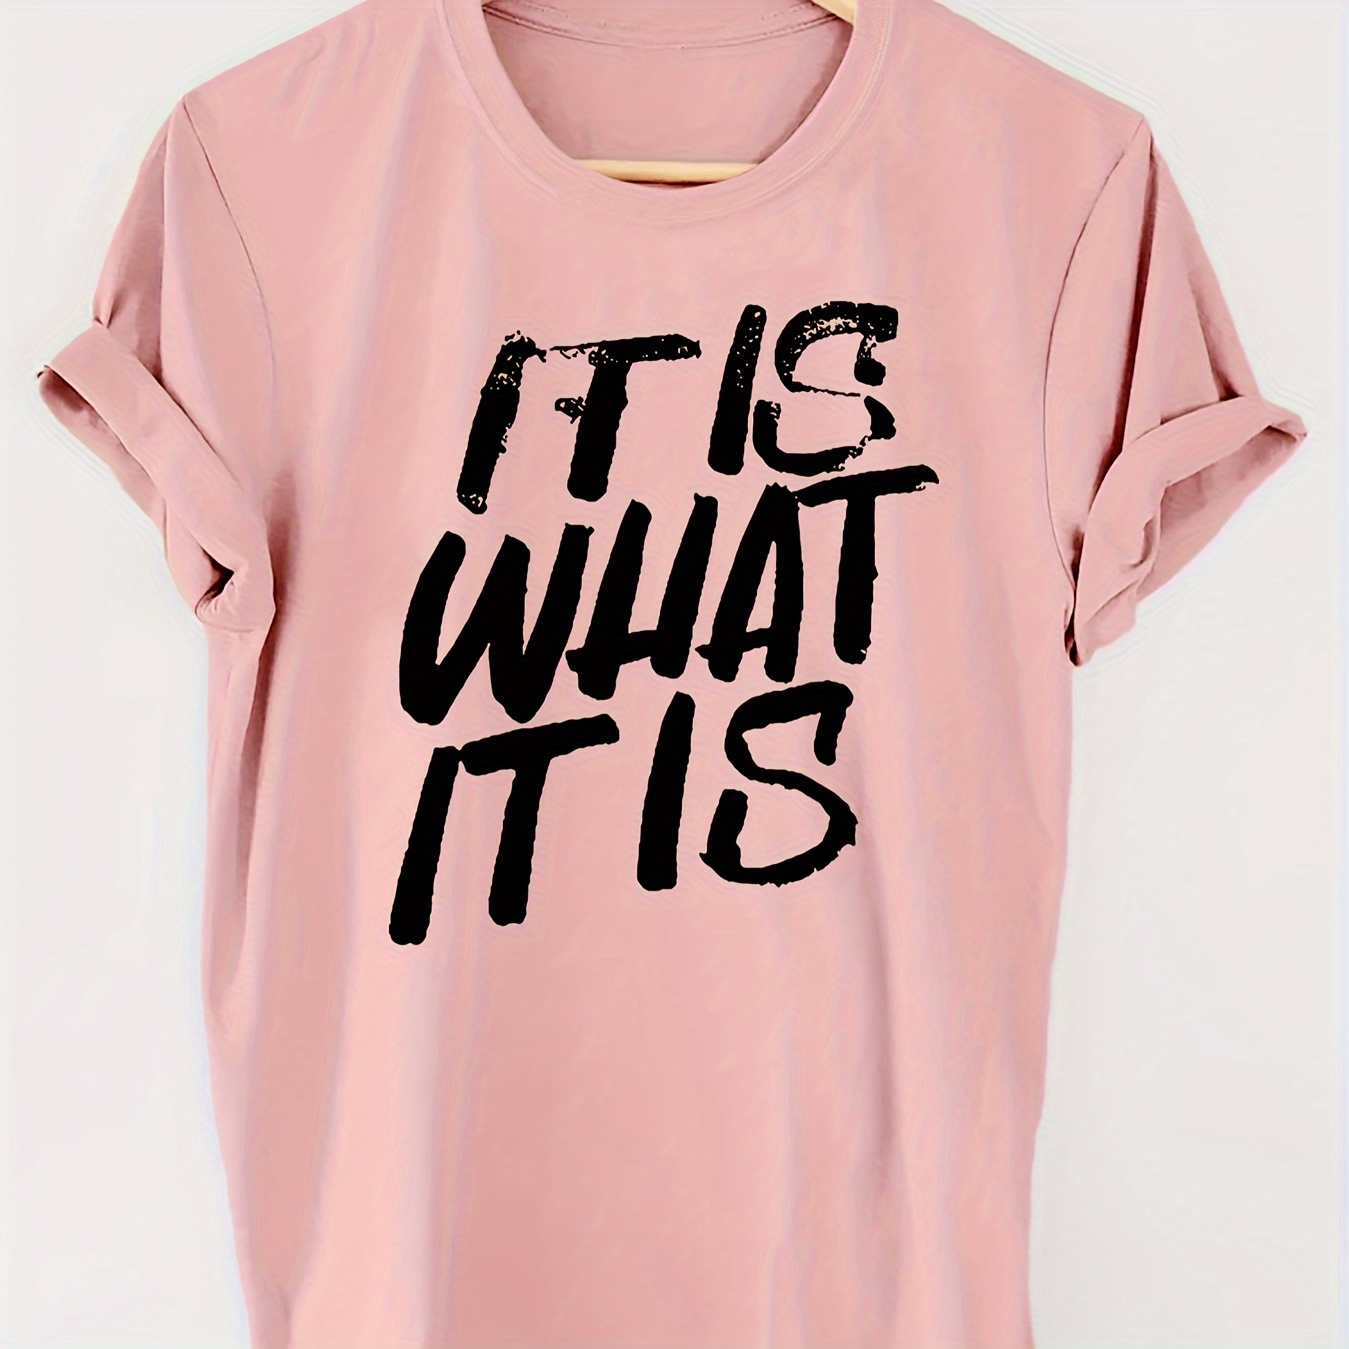 

What It Is Letter Print T-shirt, Short Sleeve Crew Neck Casual Top For Summer & Spring, Women's Clothing